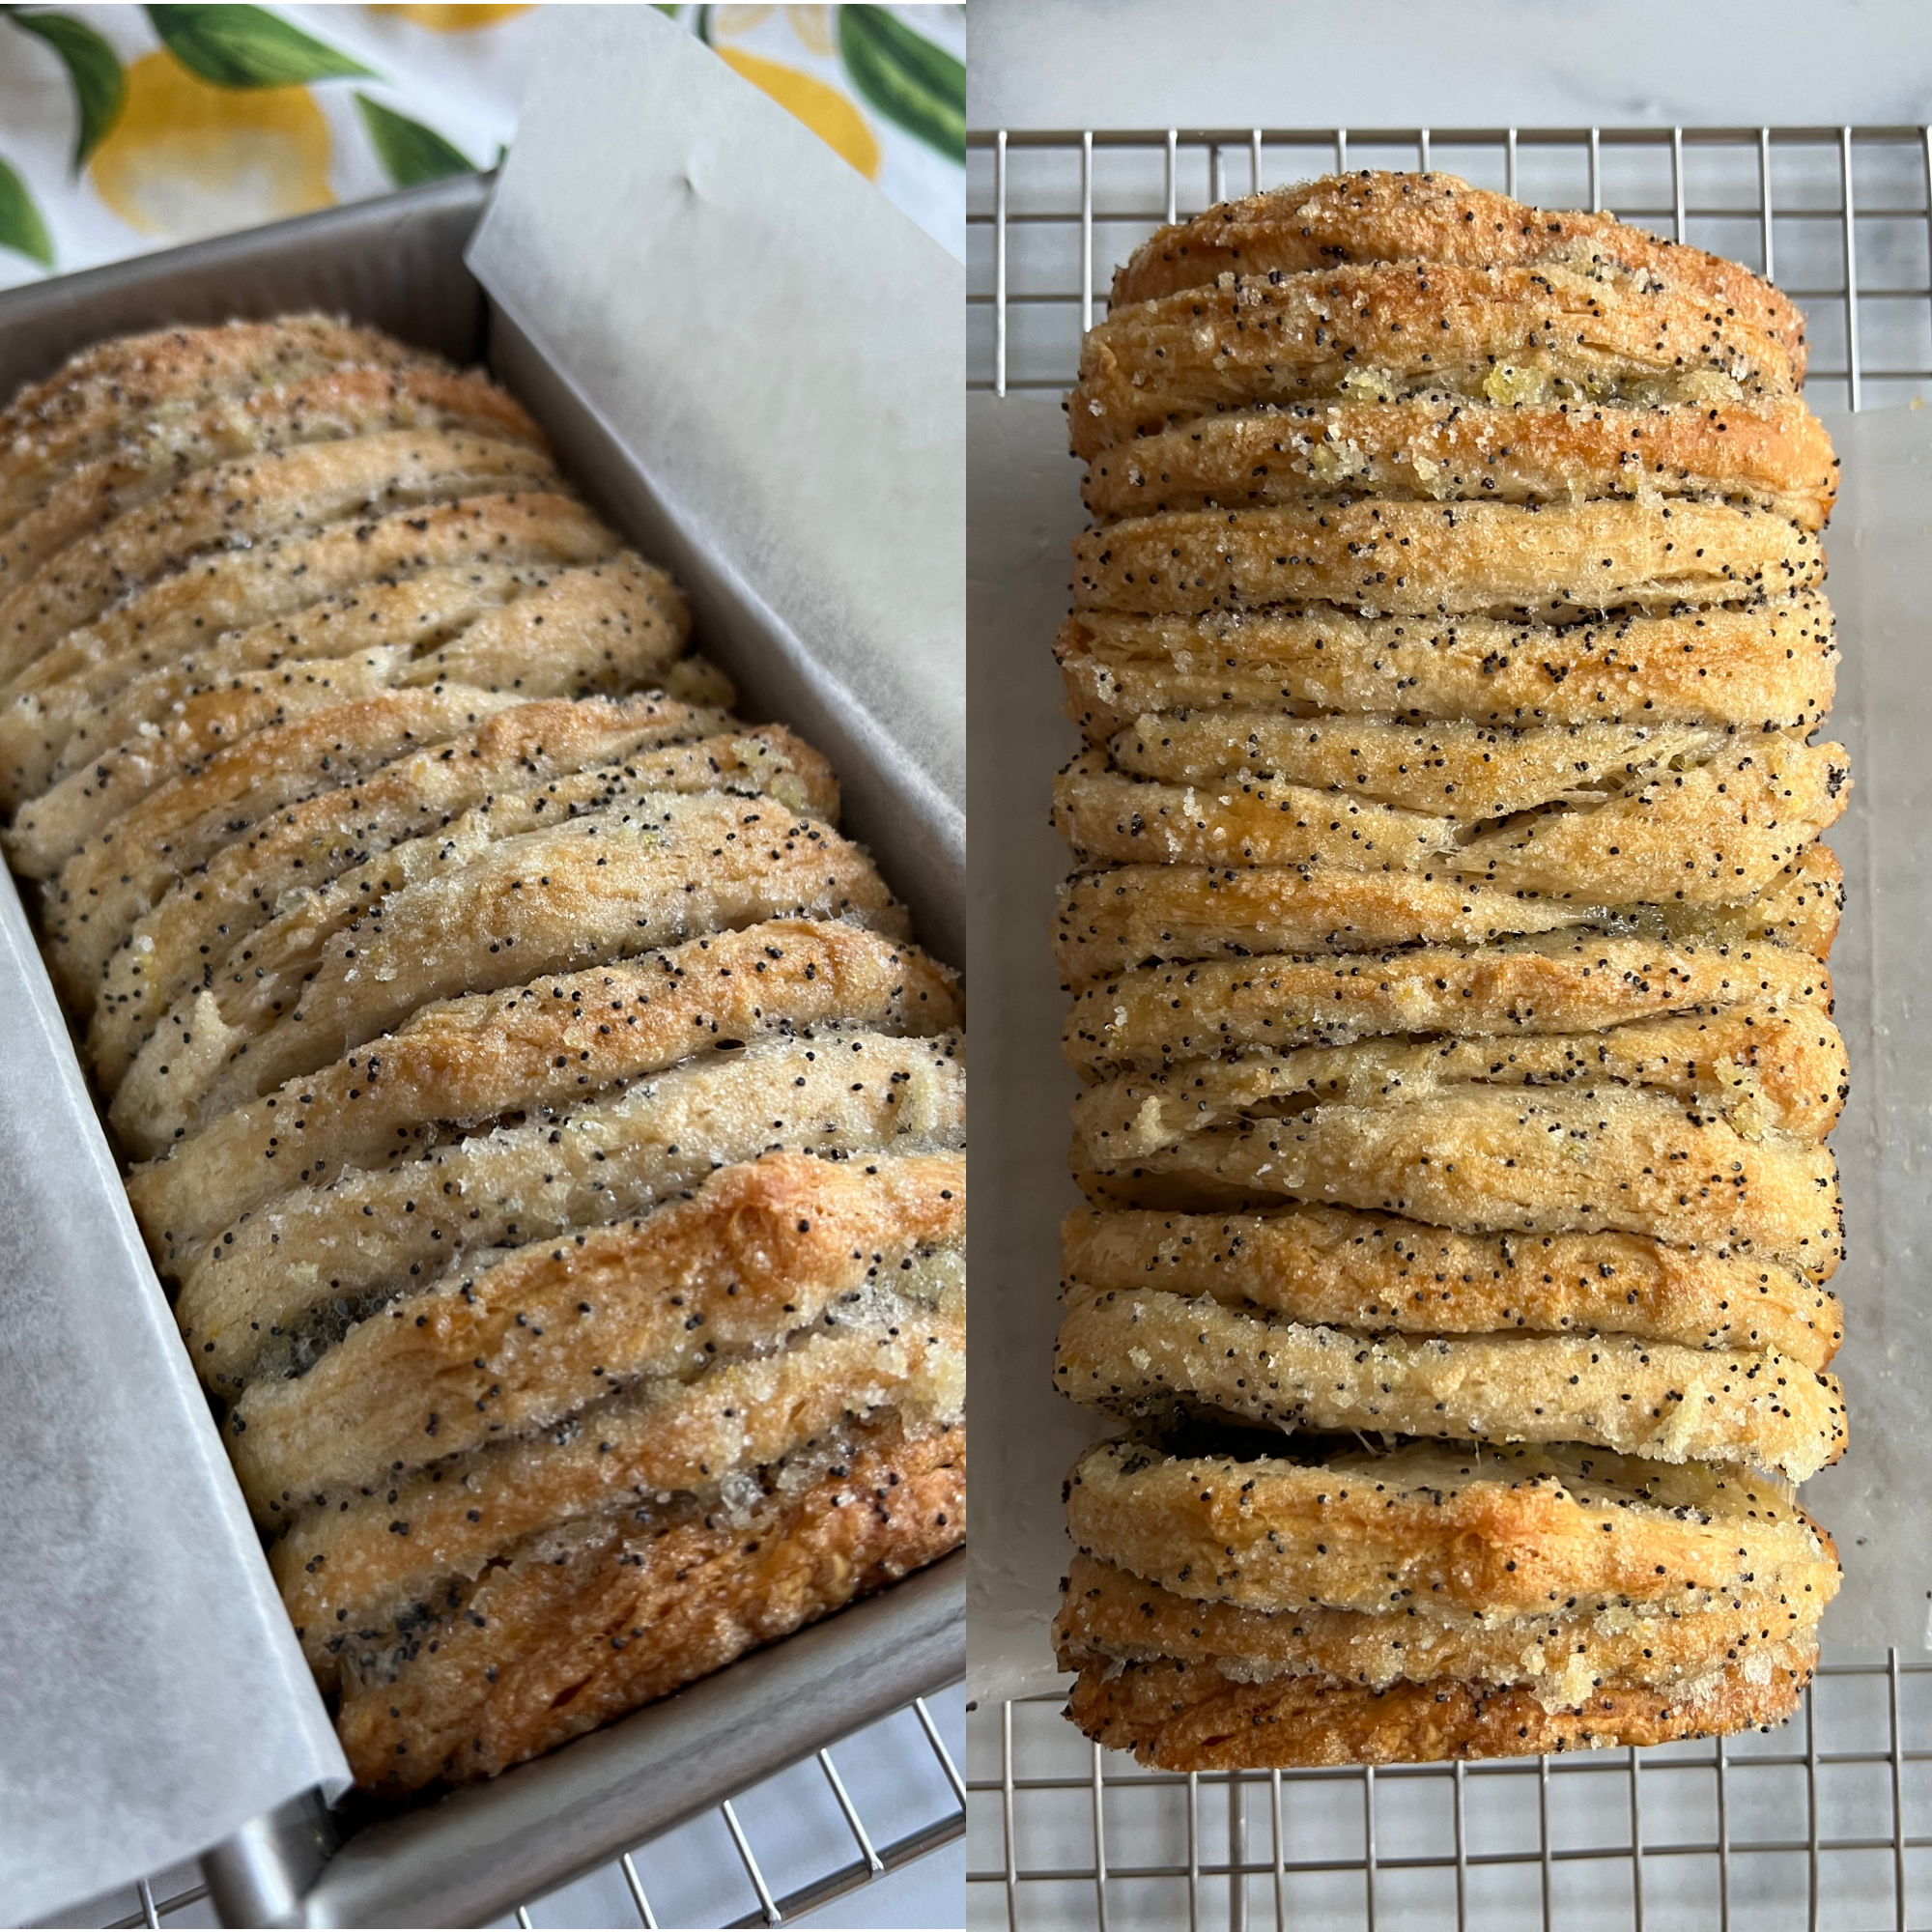 This is a two photo collage. One photo shows the bread in the pan after baking. The other photo shows the bread cooling on a rack.